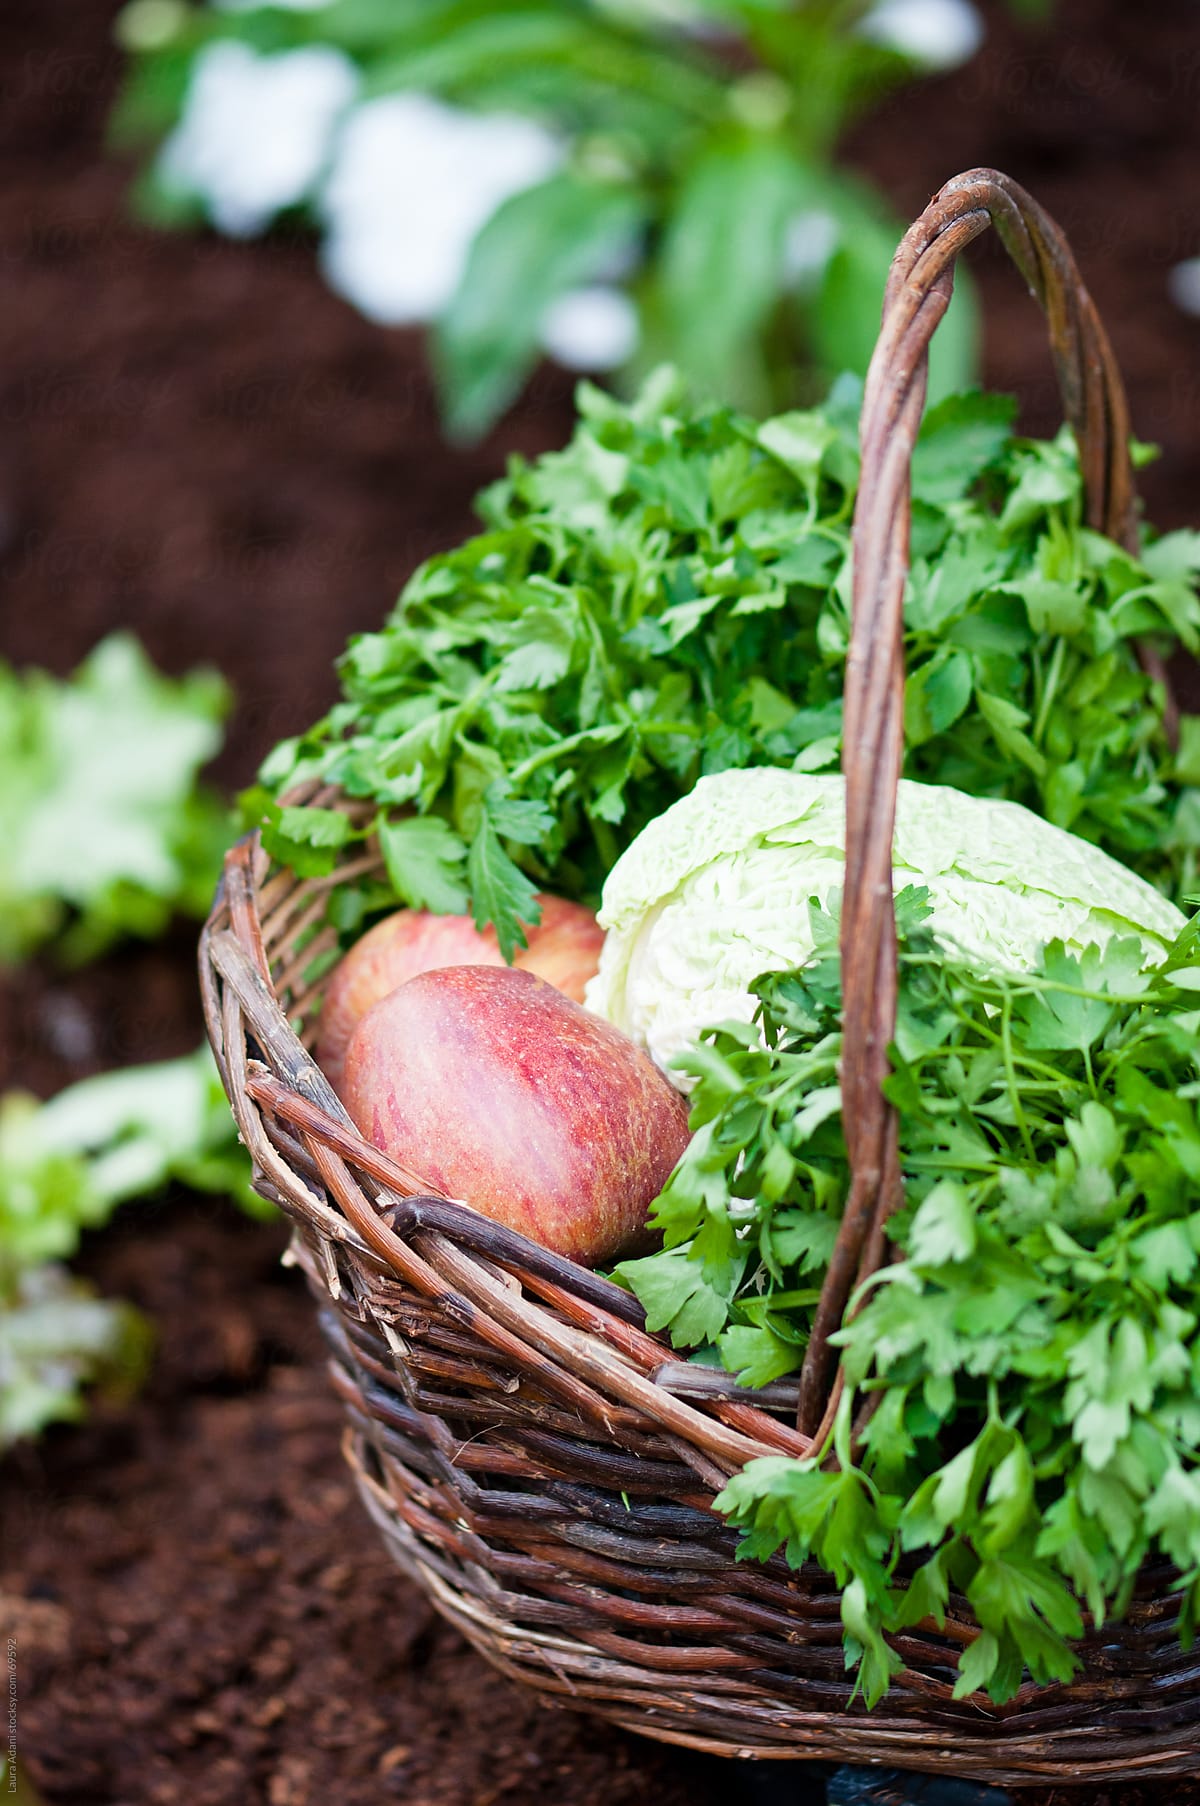 parsley, apples and cabbage in a wicker basket